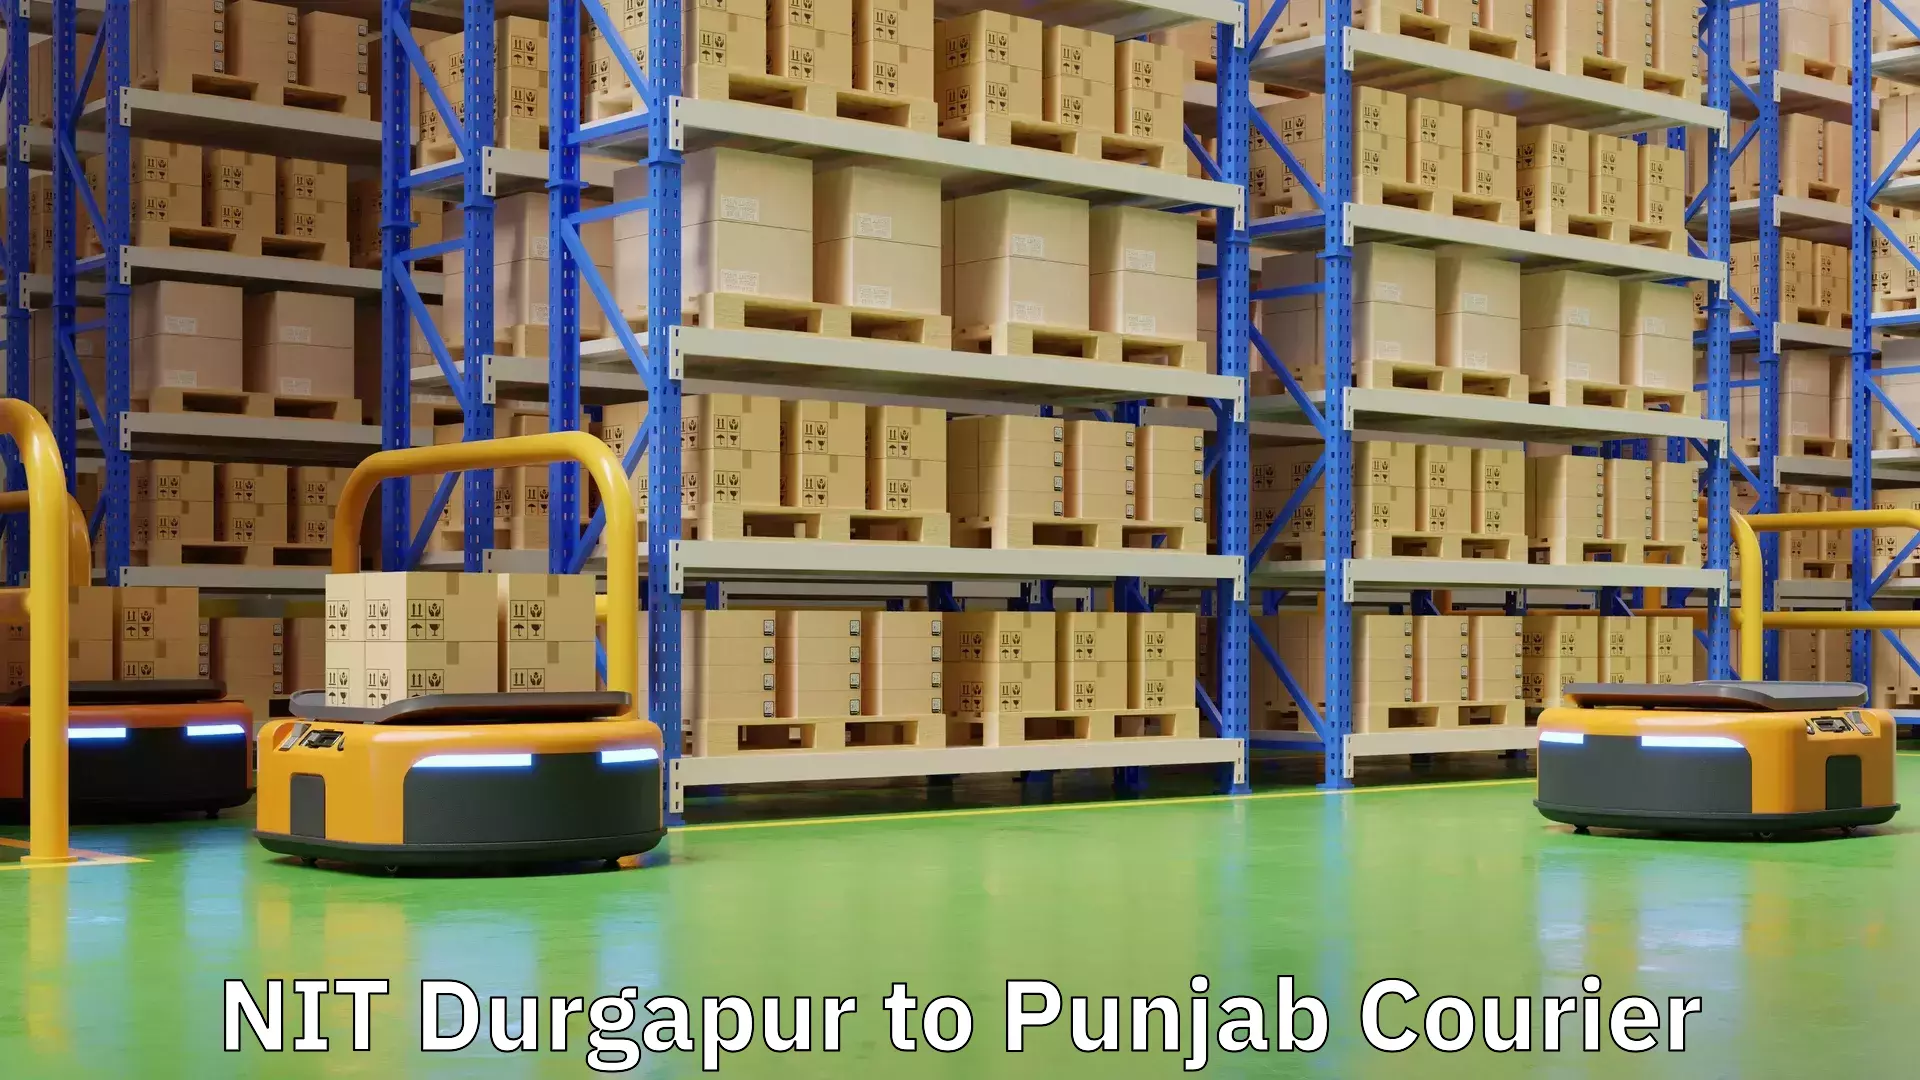 Easy access courier services NIT Durgapur to Punjab